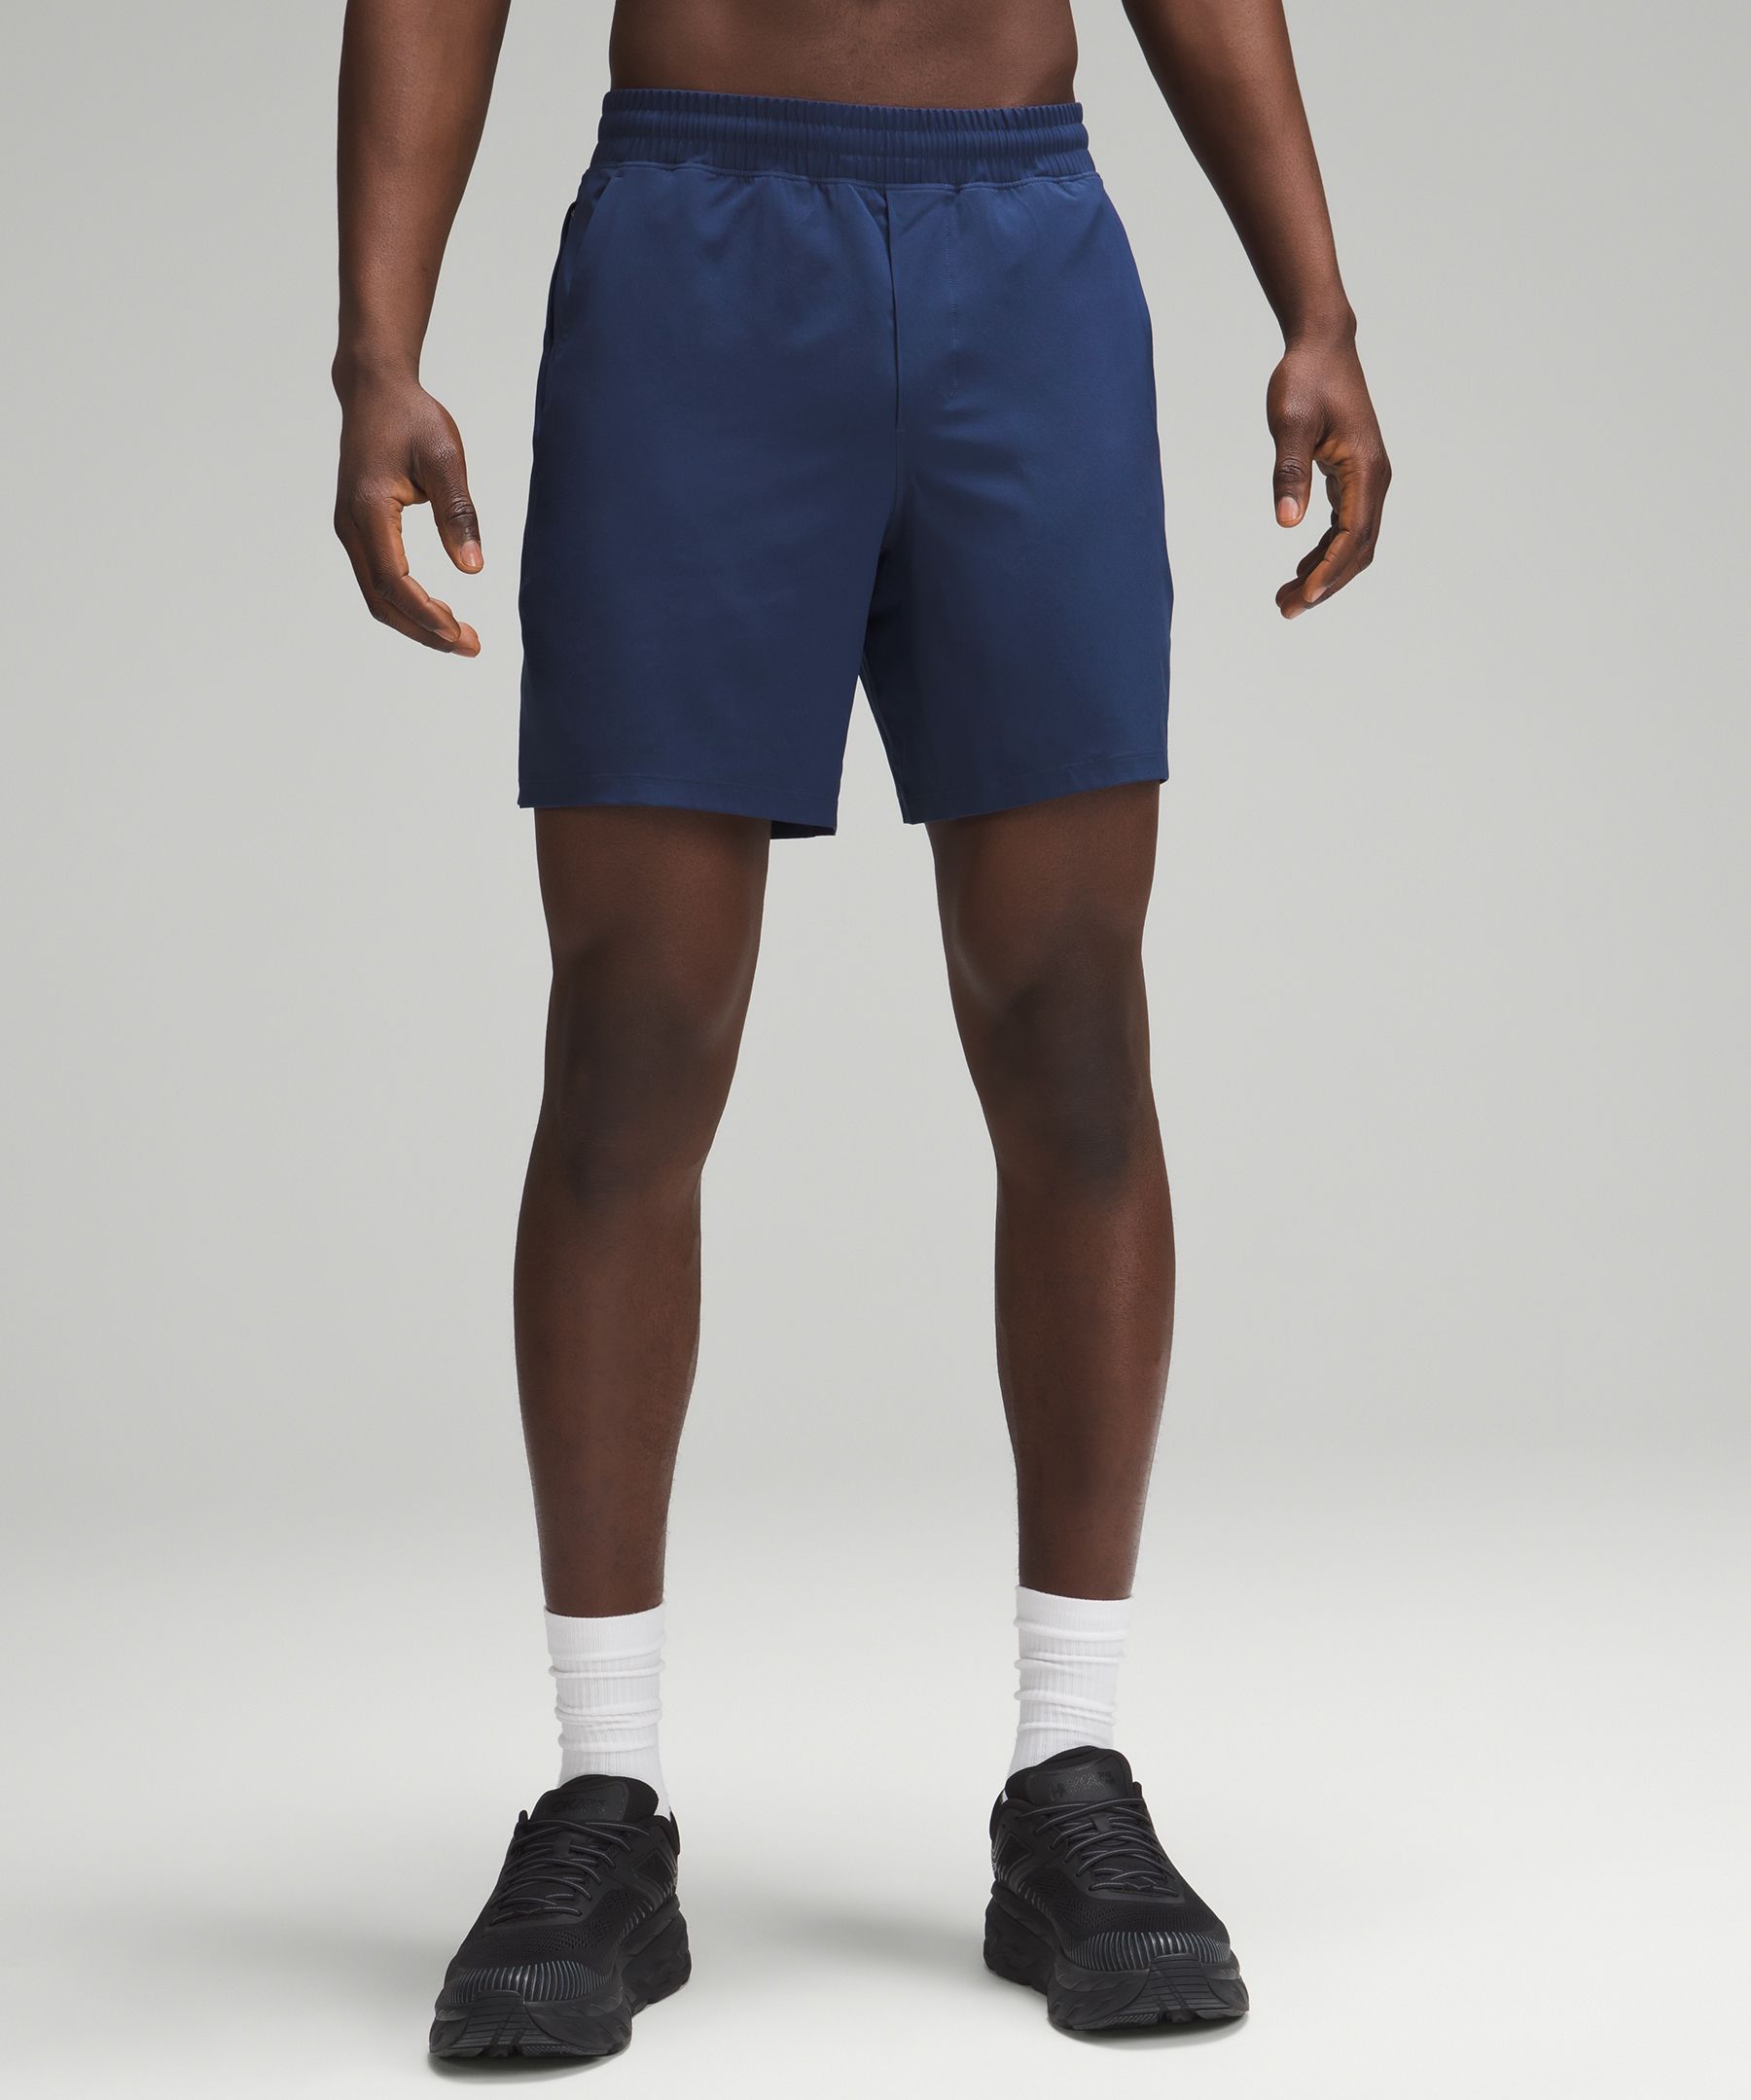 Lululemon Has A Great Deal On Men's Pace Breaker Shorts Right Now - BroBible